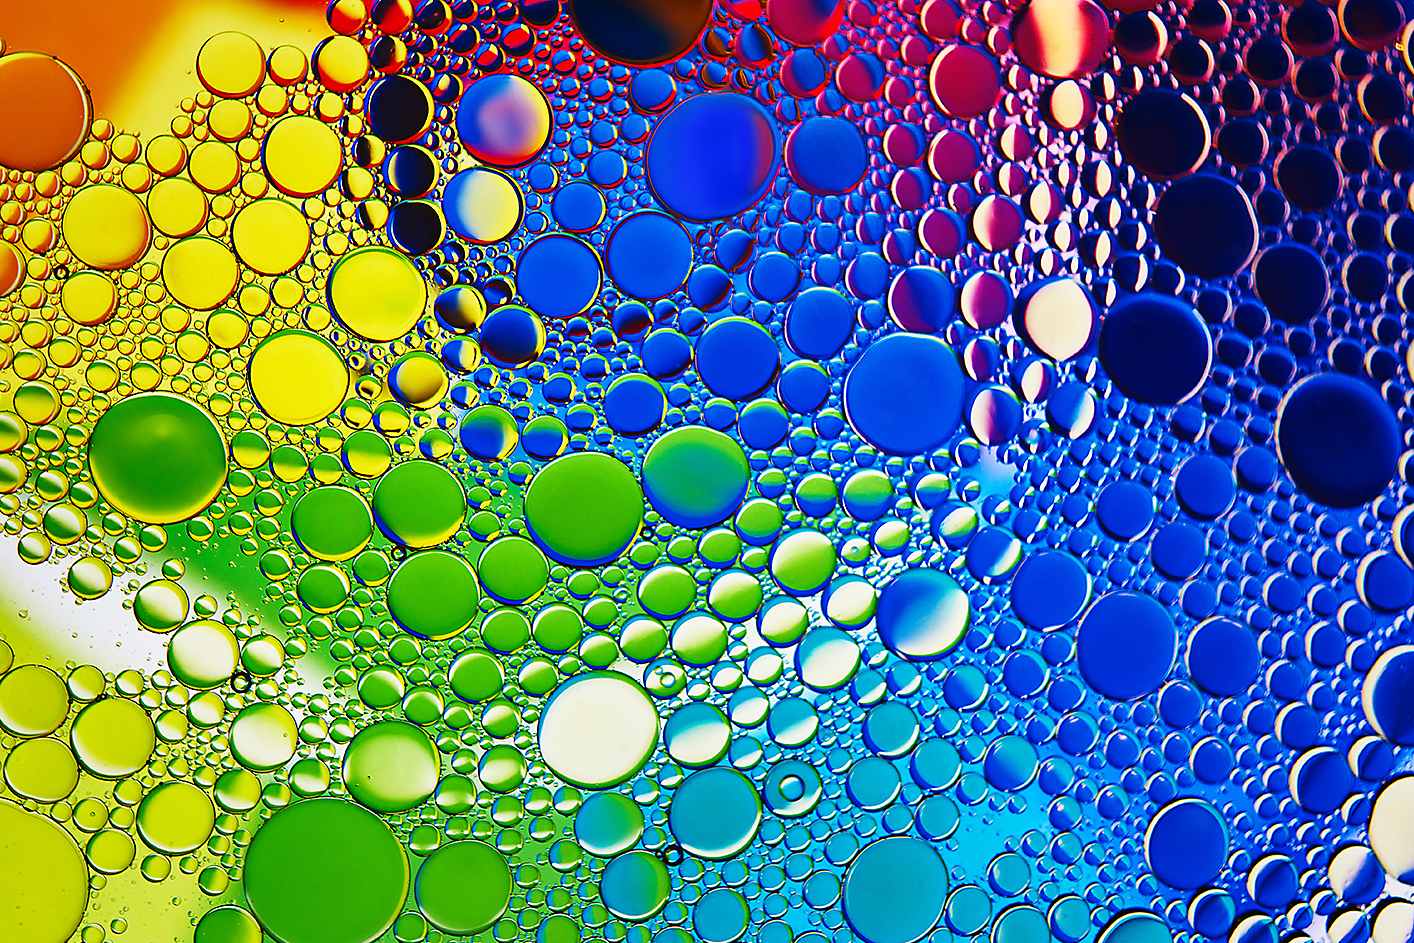 Screenshot showing multicoloured bubbles in a variety of shades and sizes